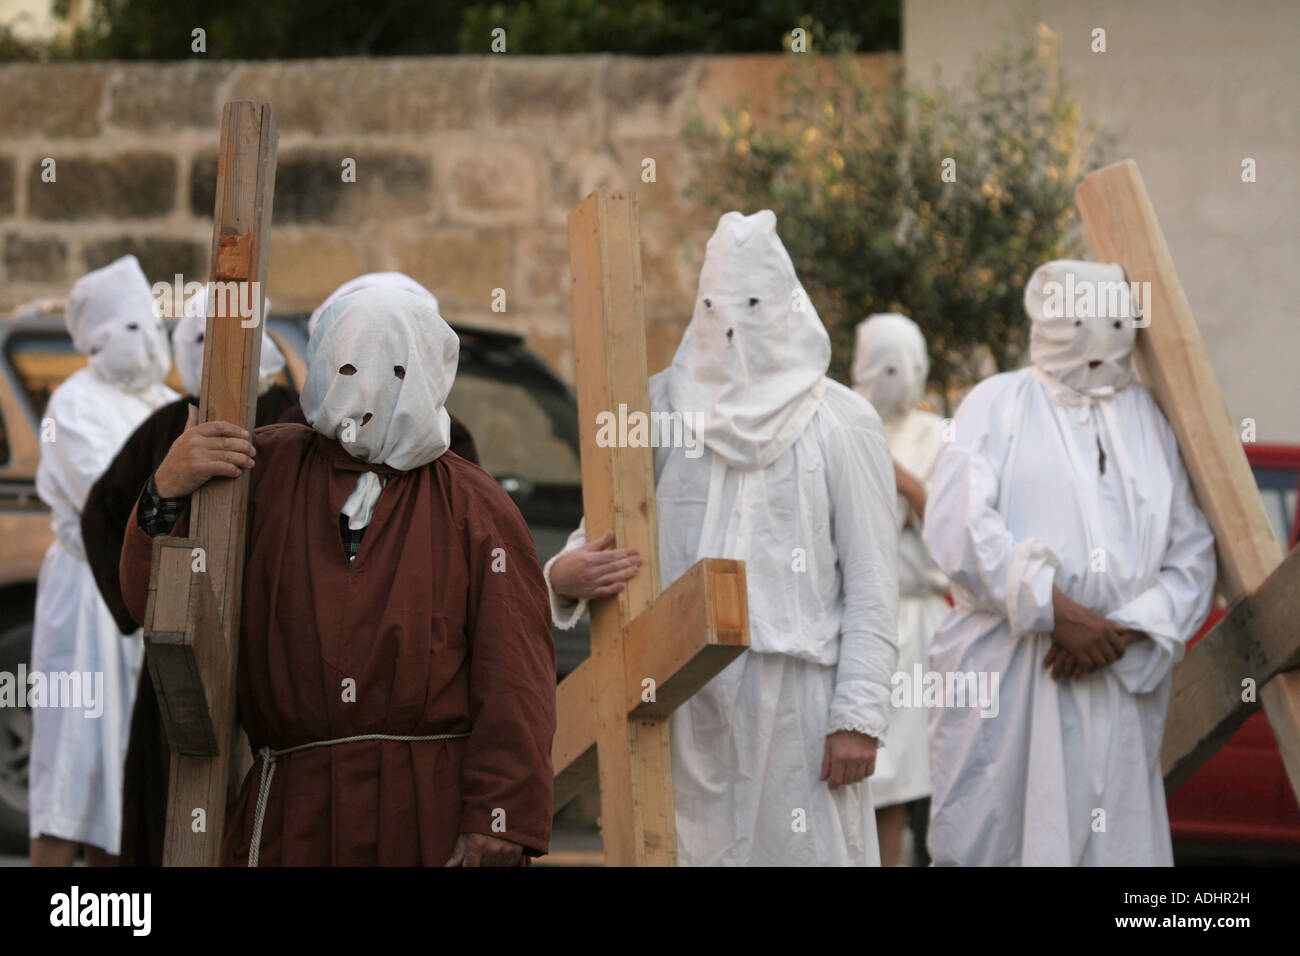 Eastertime penitents bearing crosses in Nadur, Gozo, Malta. Catholic religious traditions, faith, Christianity, sin, atonement and redemption. Stock Photo